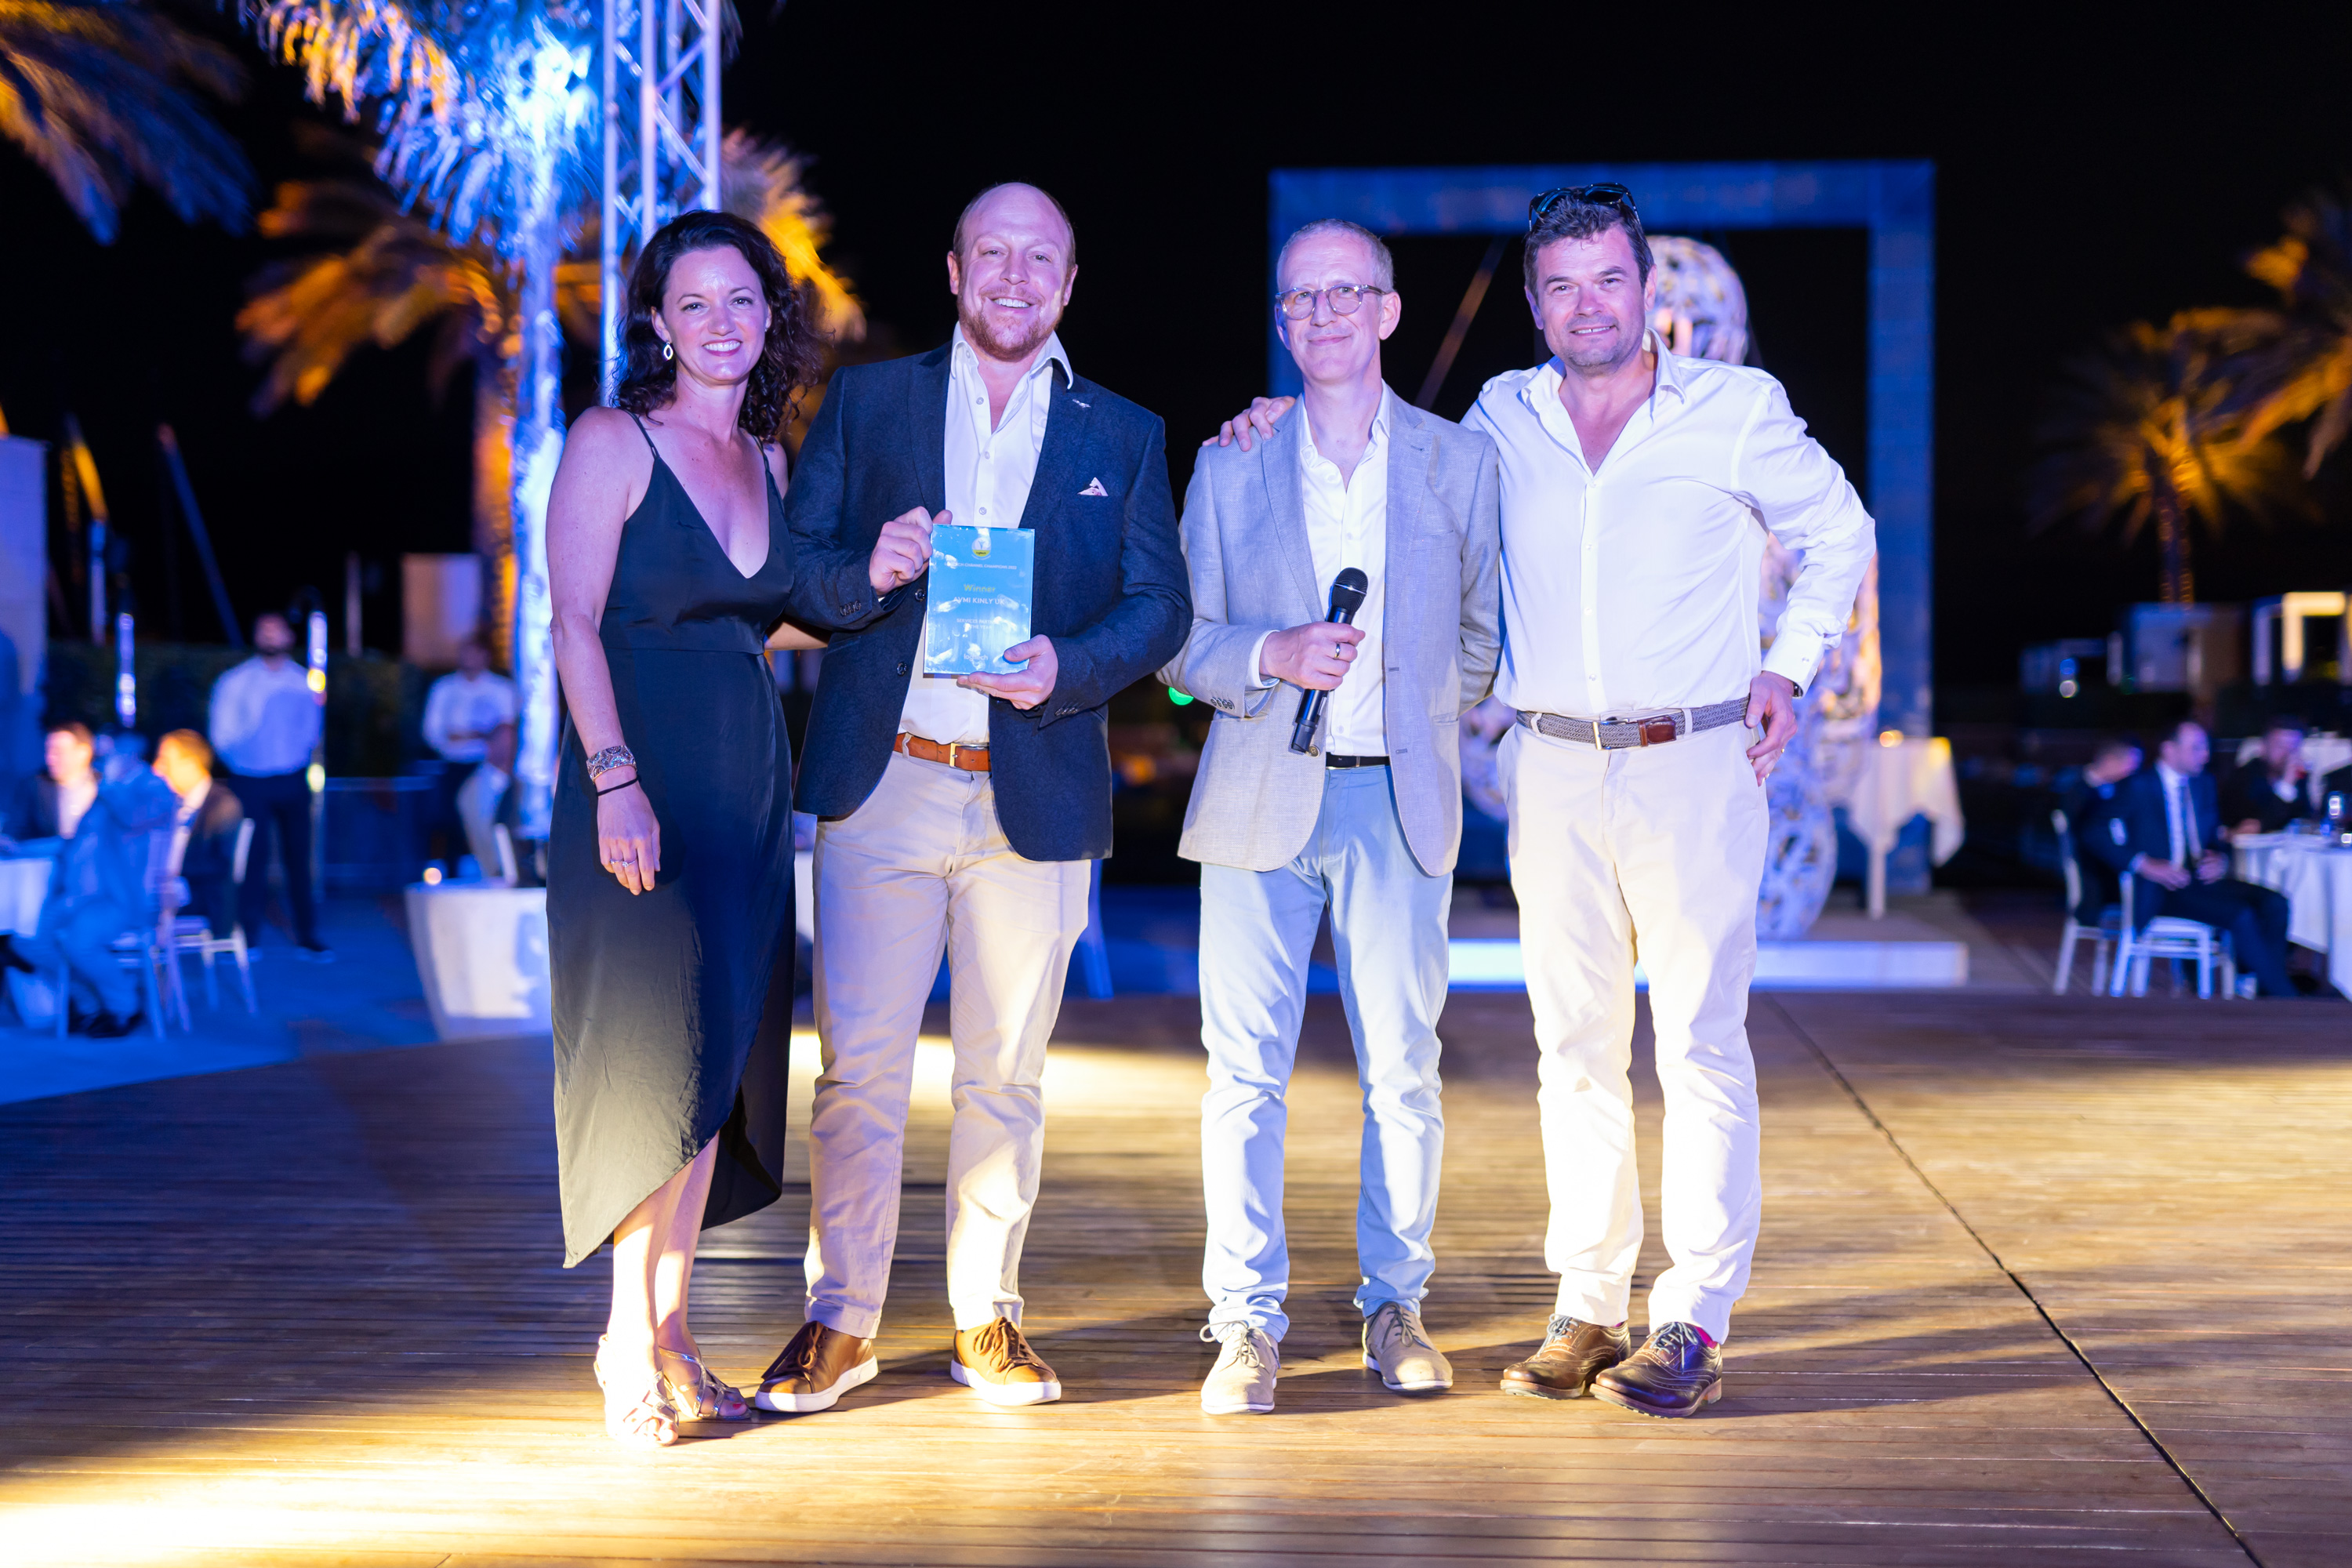 Channel Champions 22’ event in Montenegro